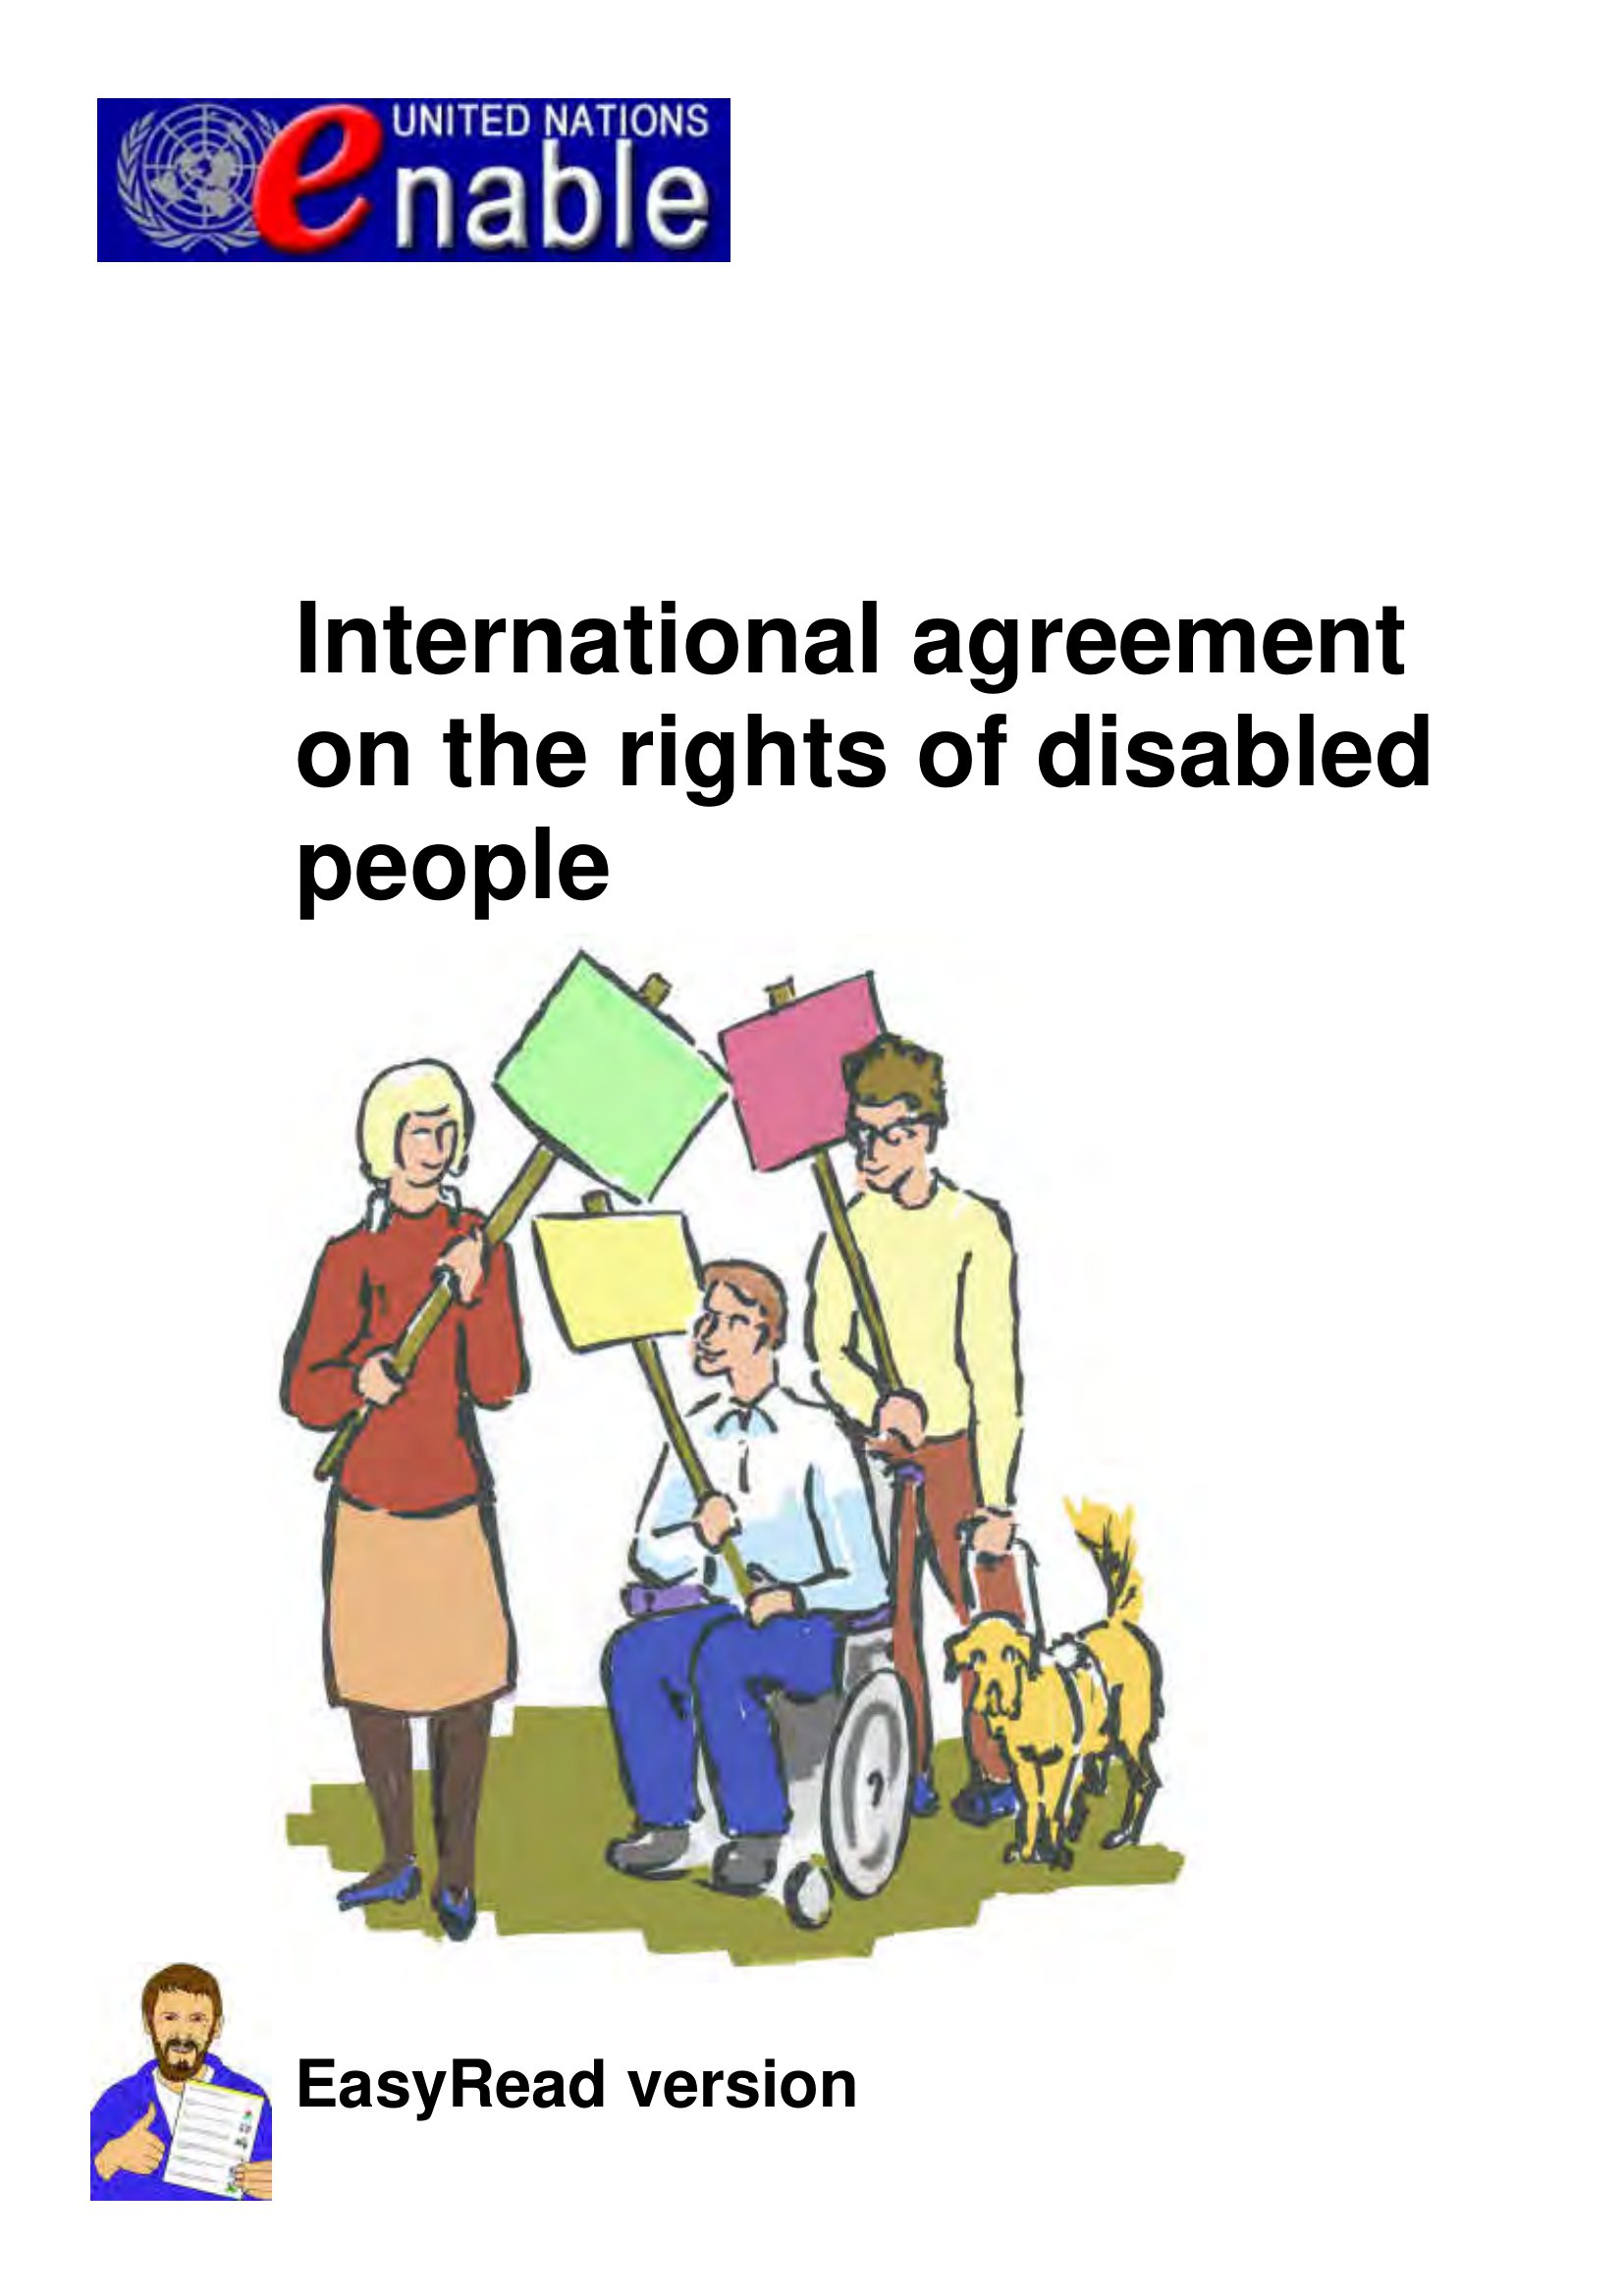 https://downsyndrome.ie/wp-content/uploads/2023/04/IS164-07-Easyread-UN-Convention-on-Human-Rights.jpg